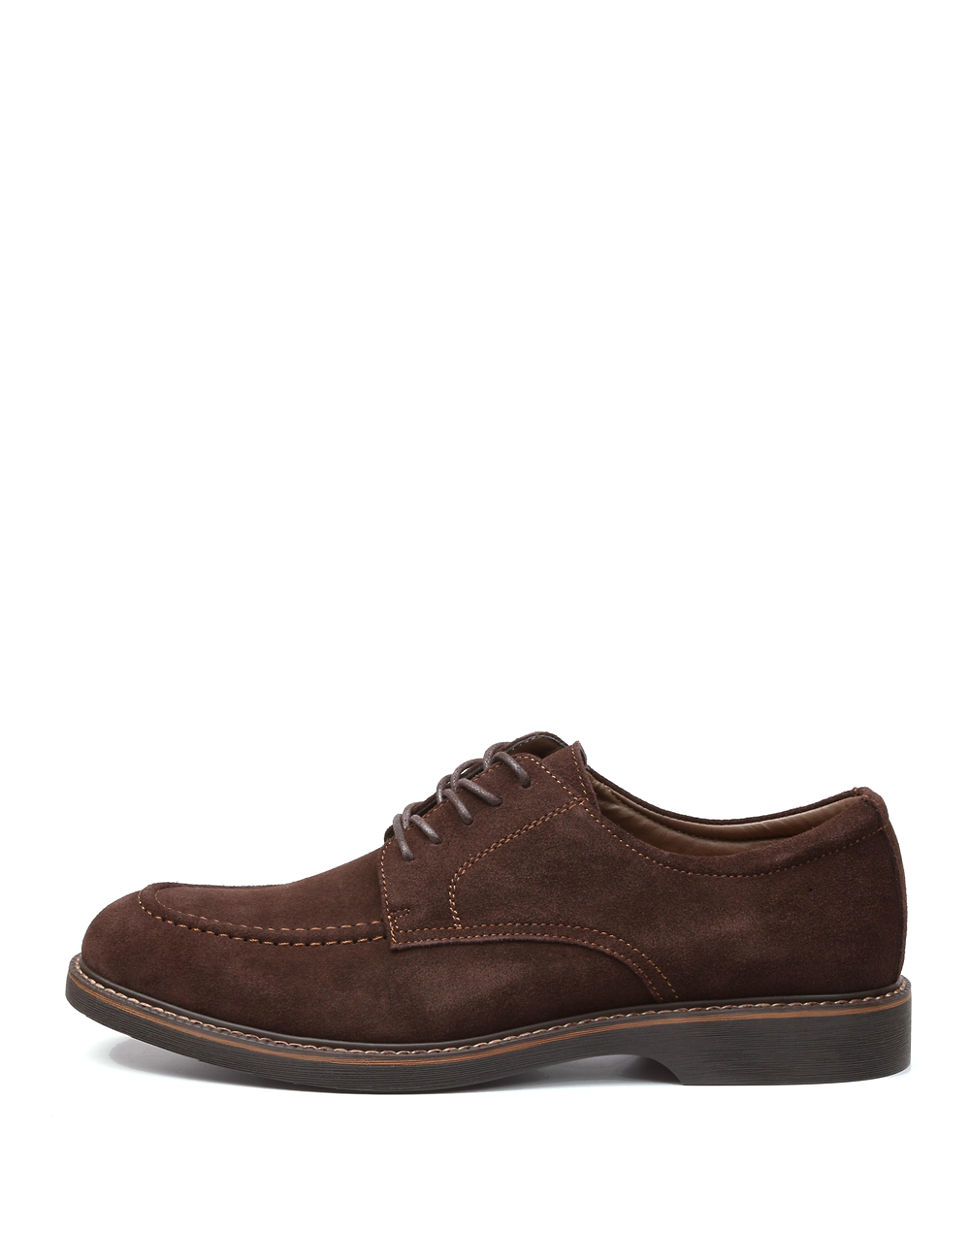 G.H.BASS Pasadena 1 Suede Derby Shoes in Brown for Men - Lyst